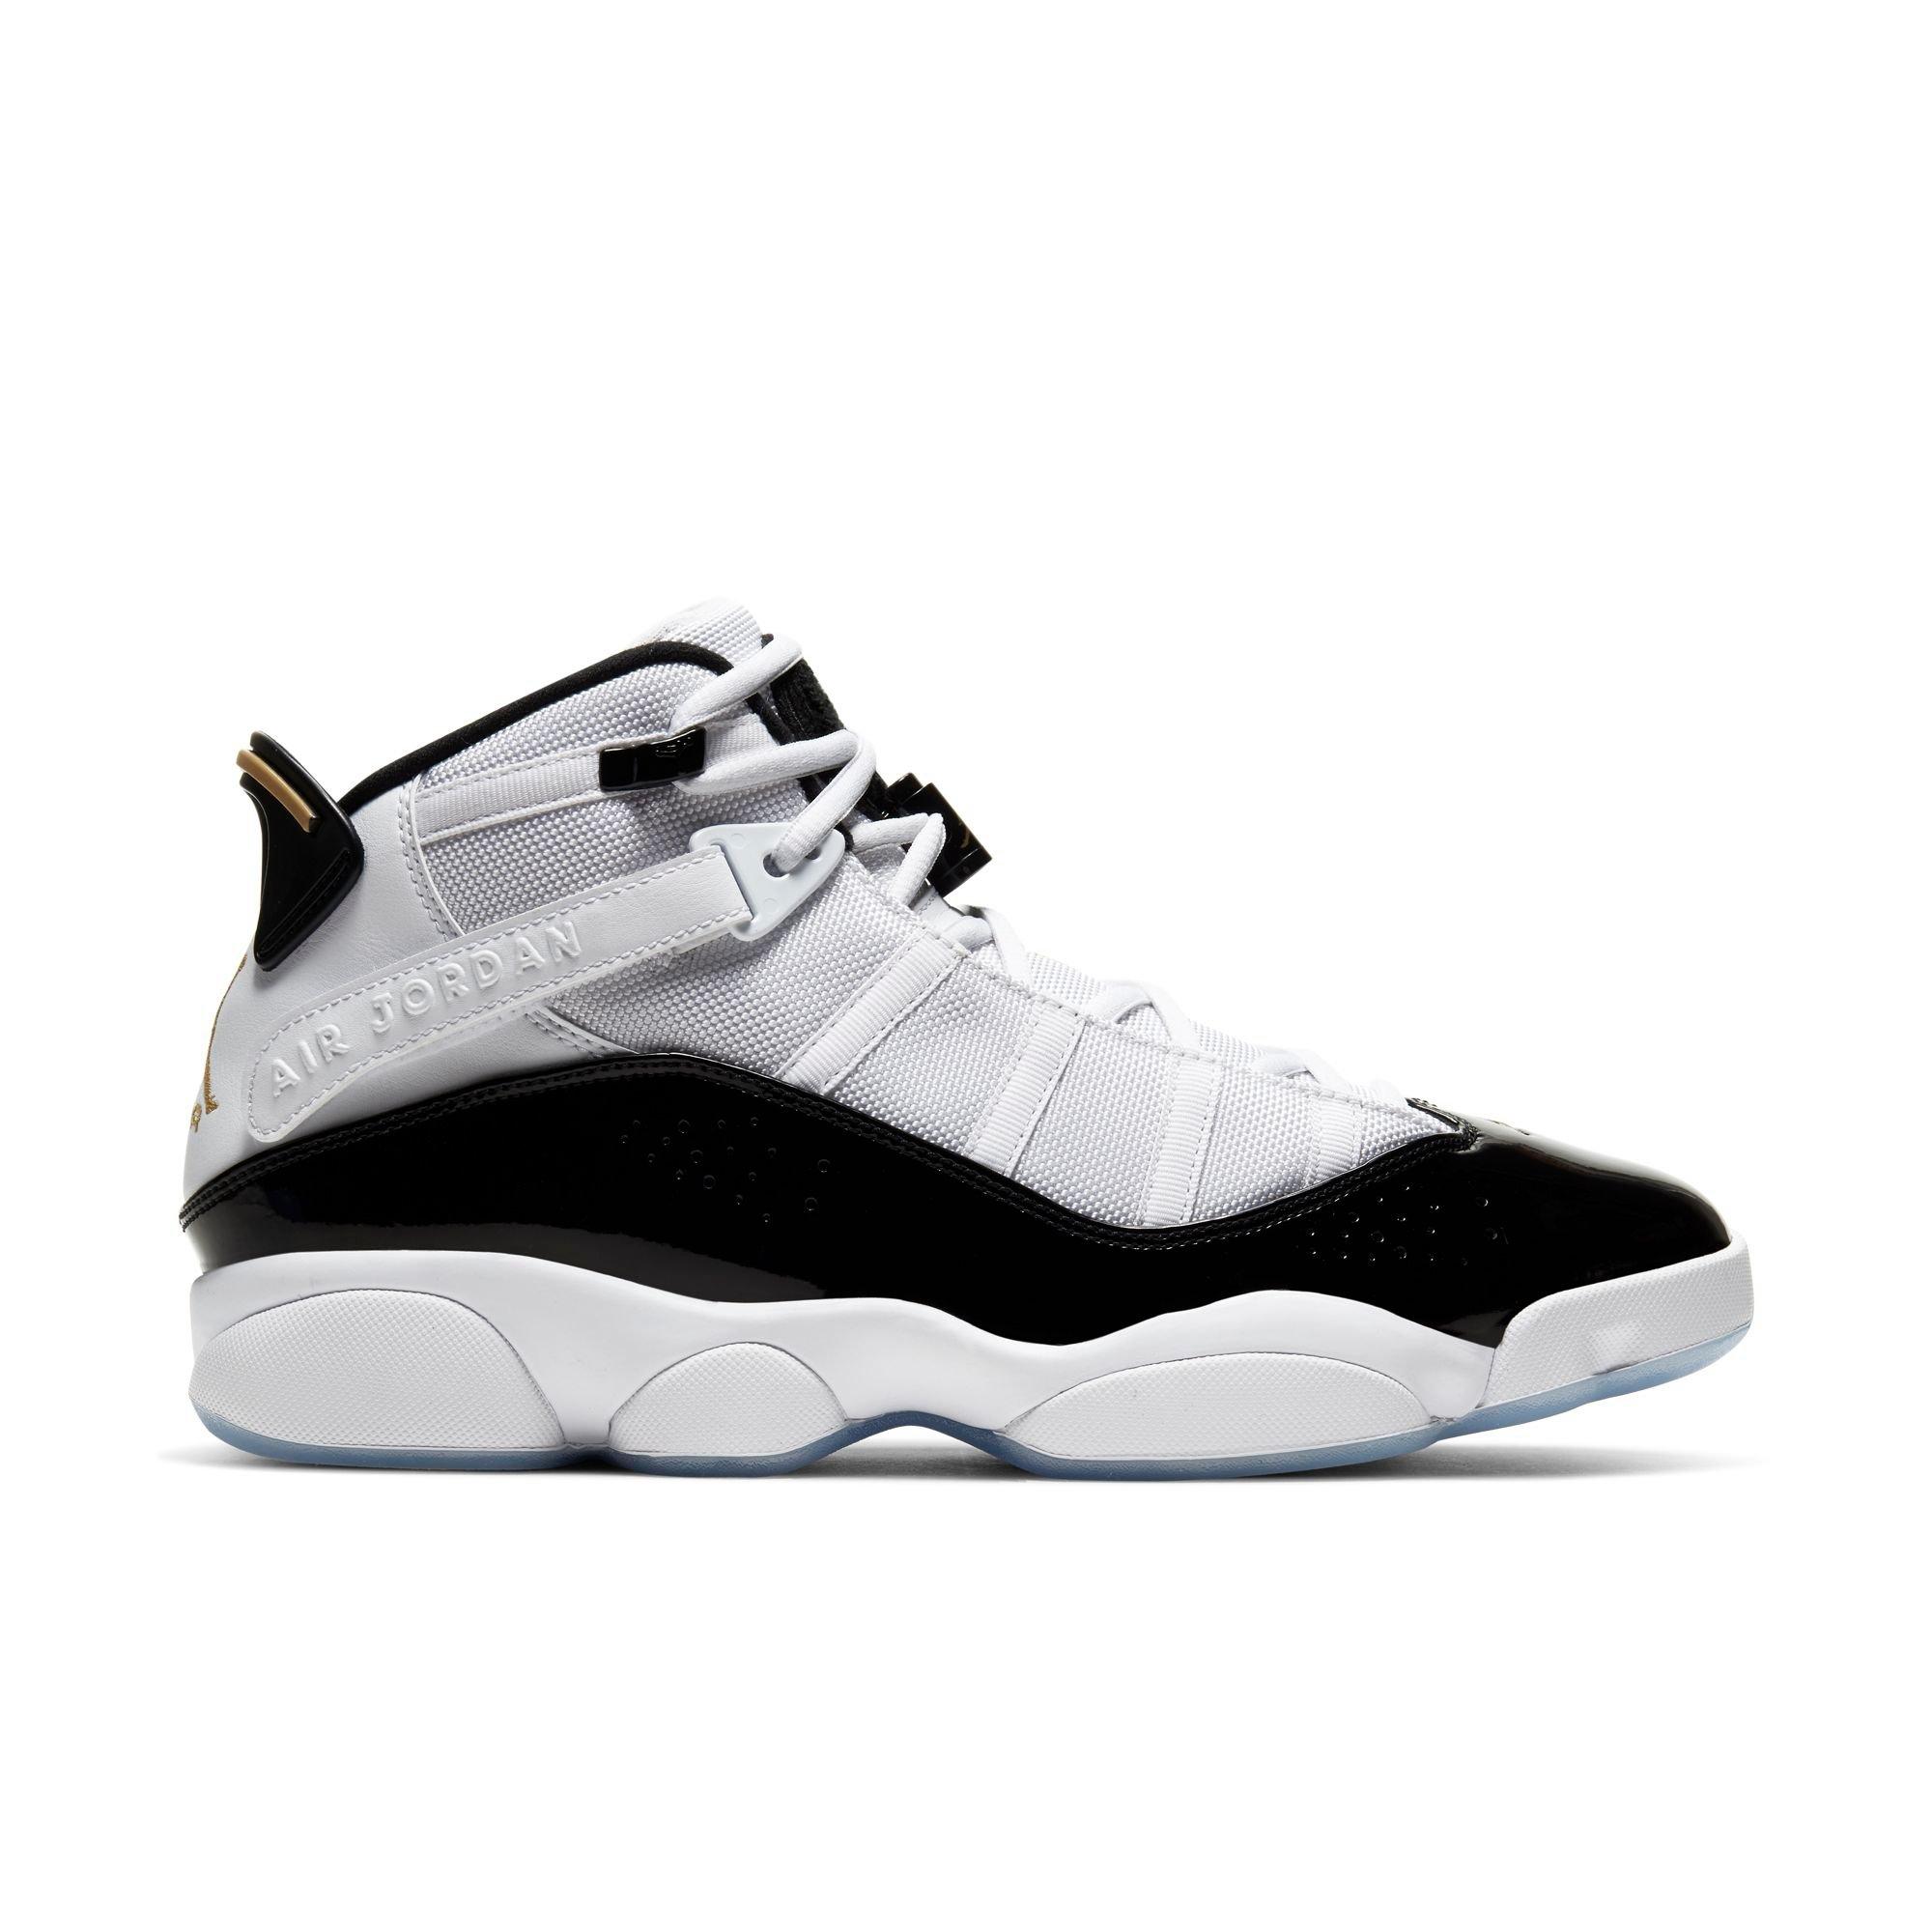 basketball shoes under 50 mens